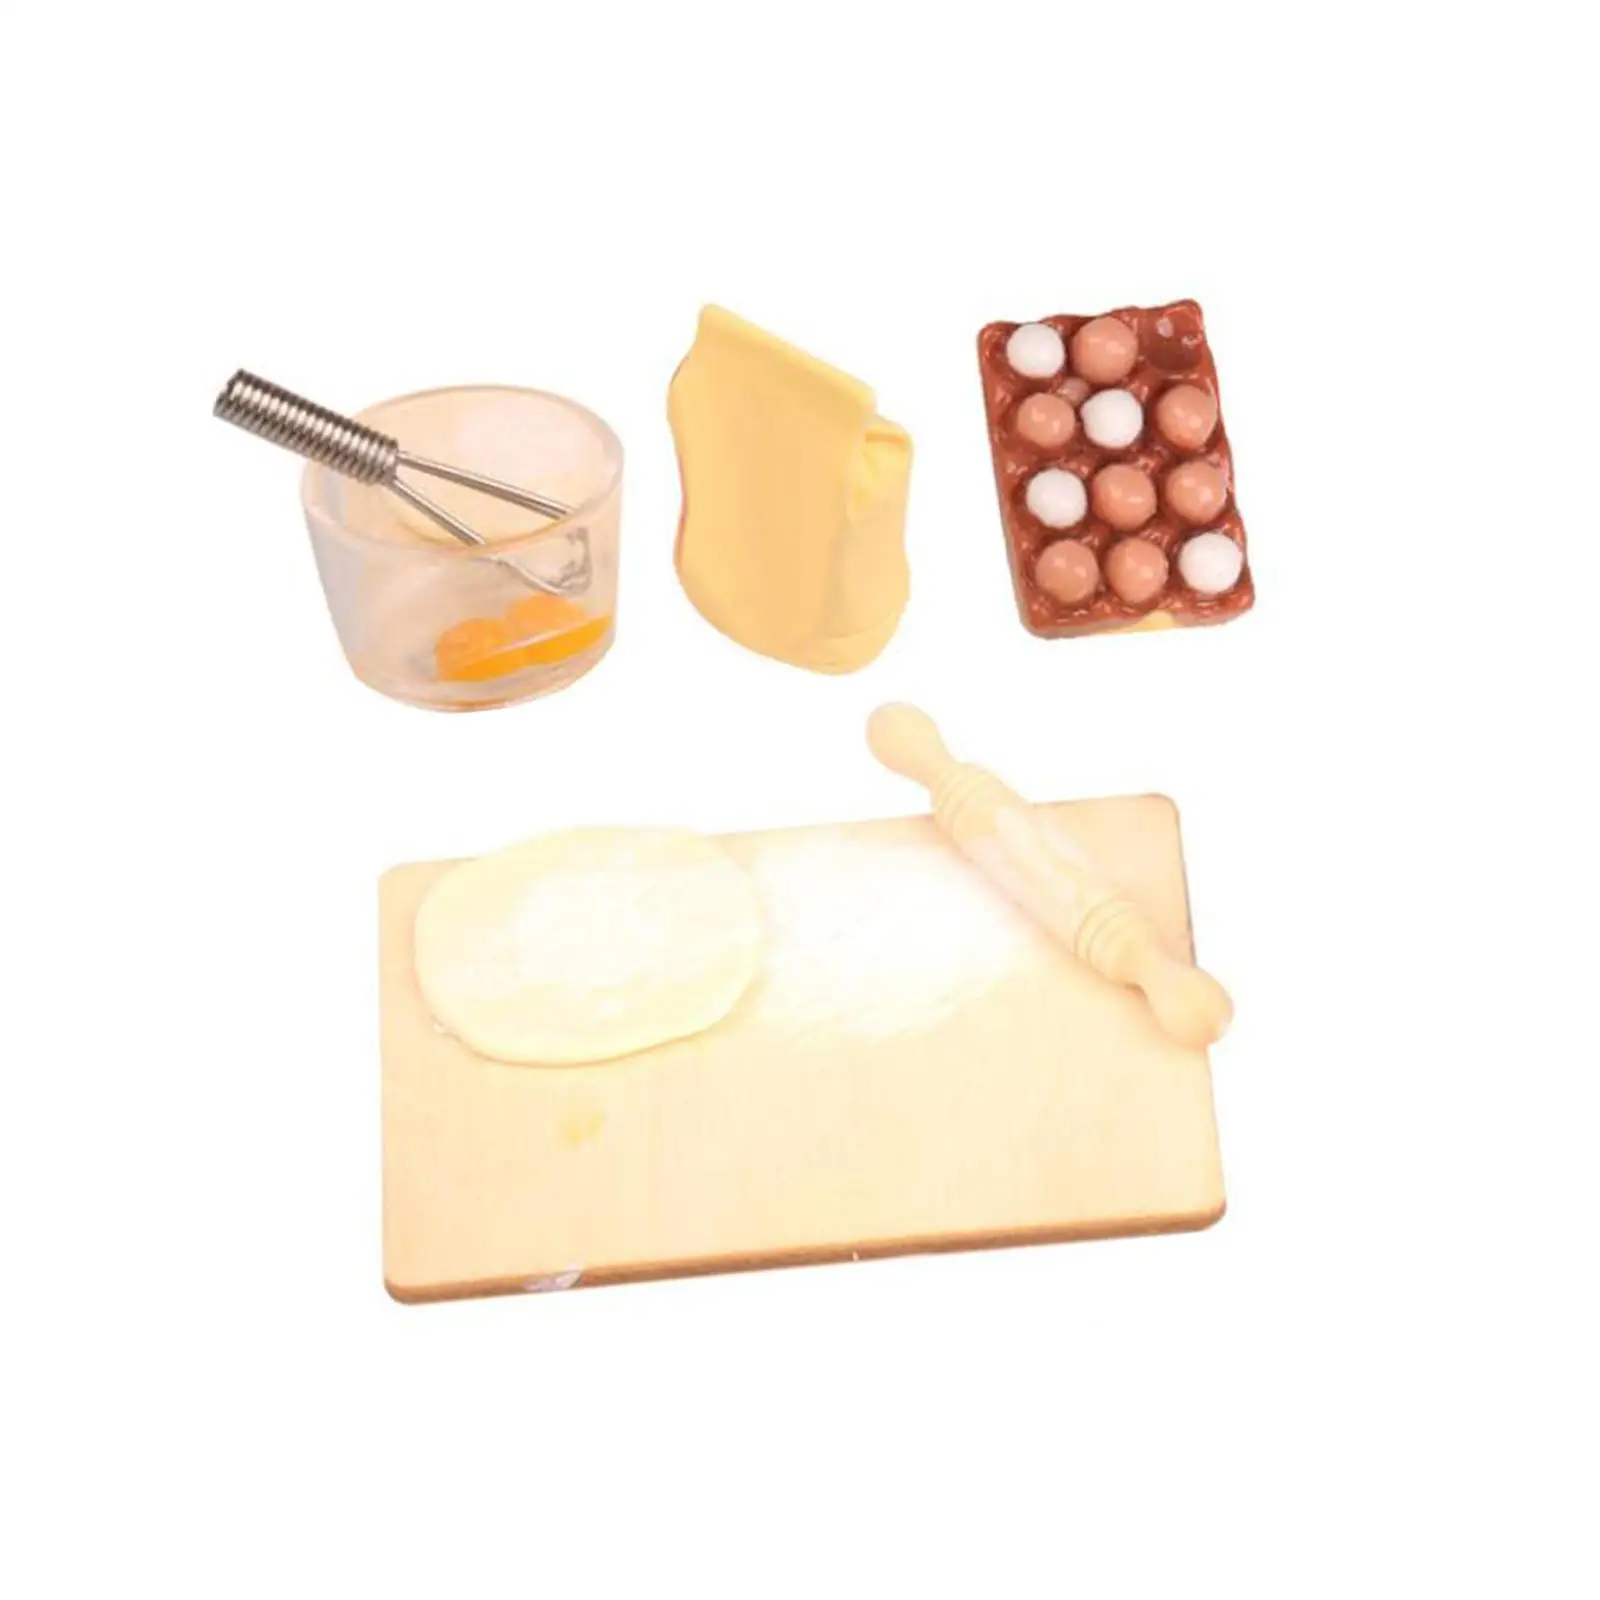 1:12 Miniature Food Baking Set Dollhouse Decoration Accessories 1/12 Miniature Baking Cooking Set for Home Restaurant Bakery